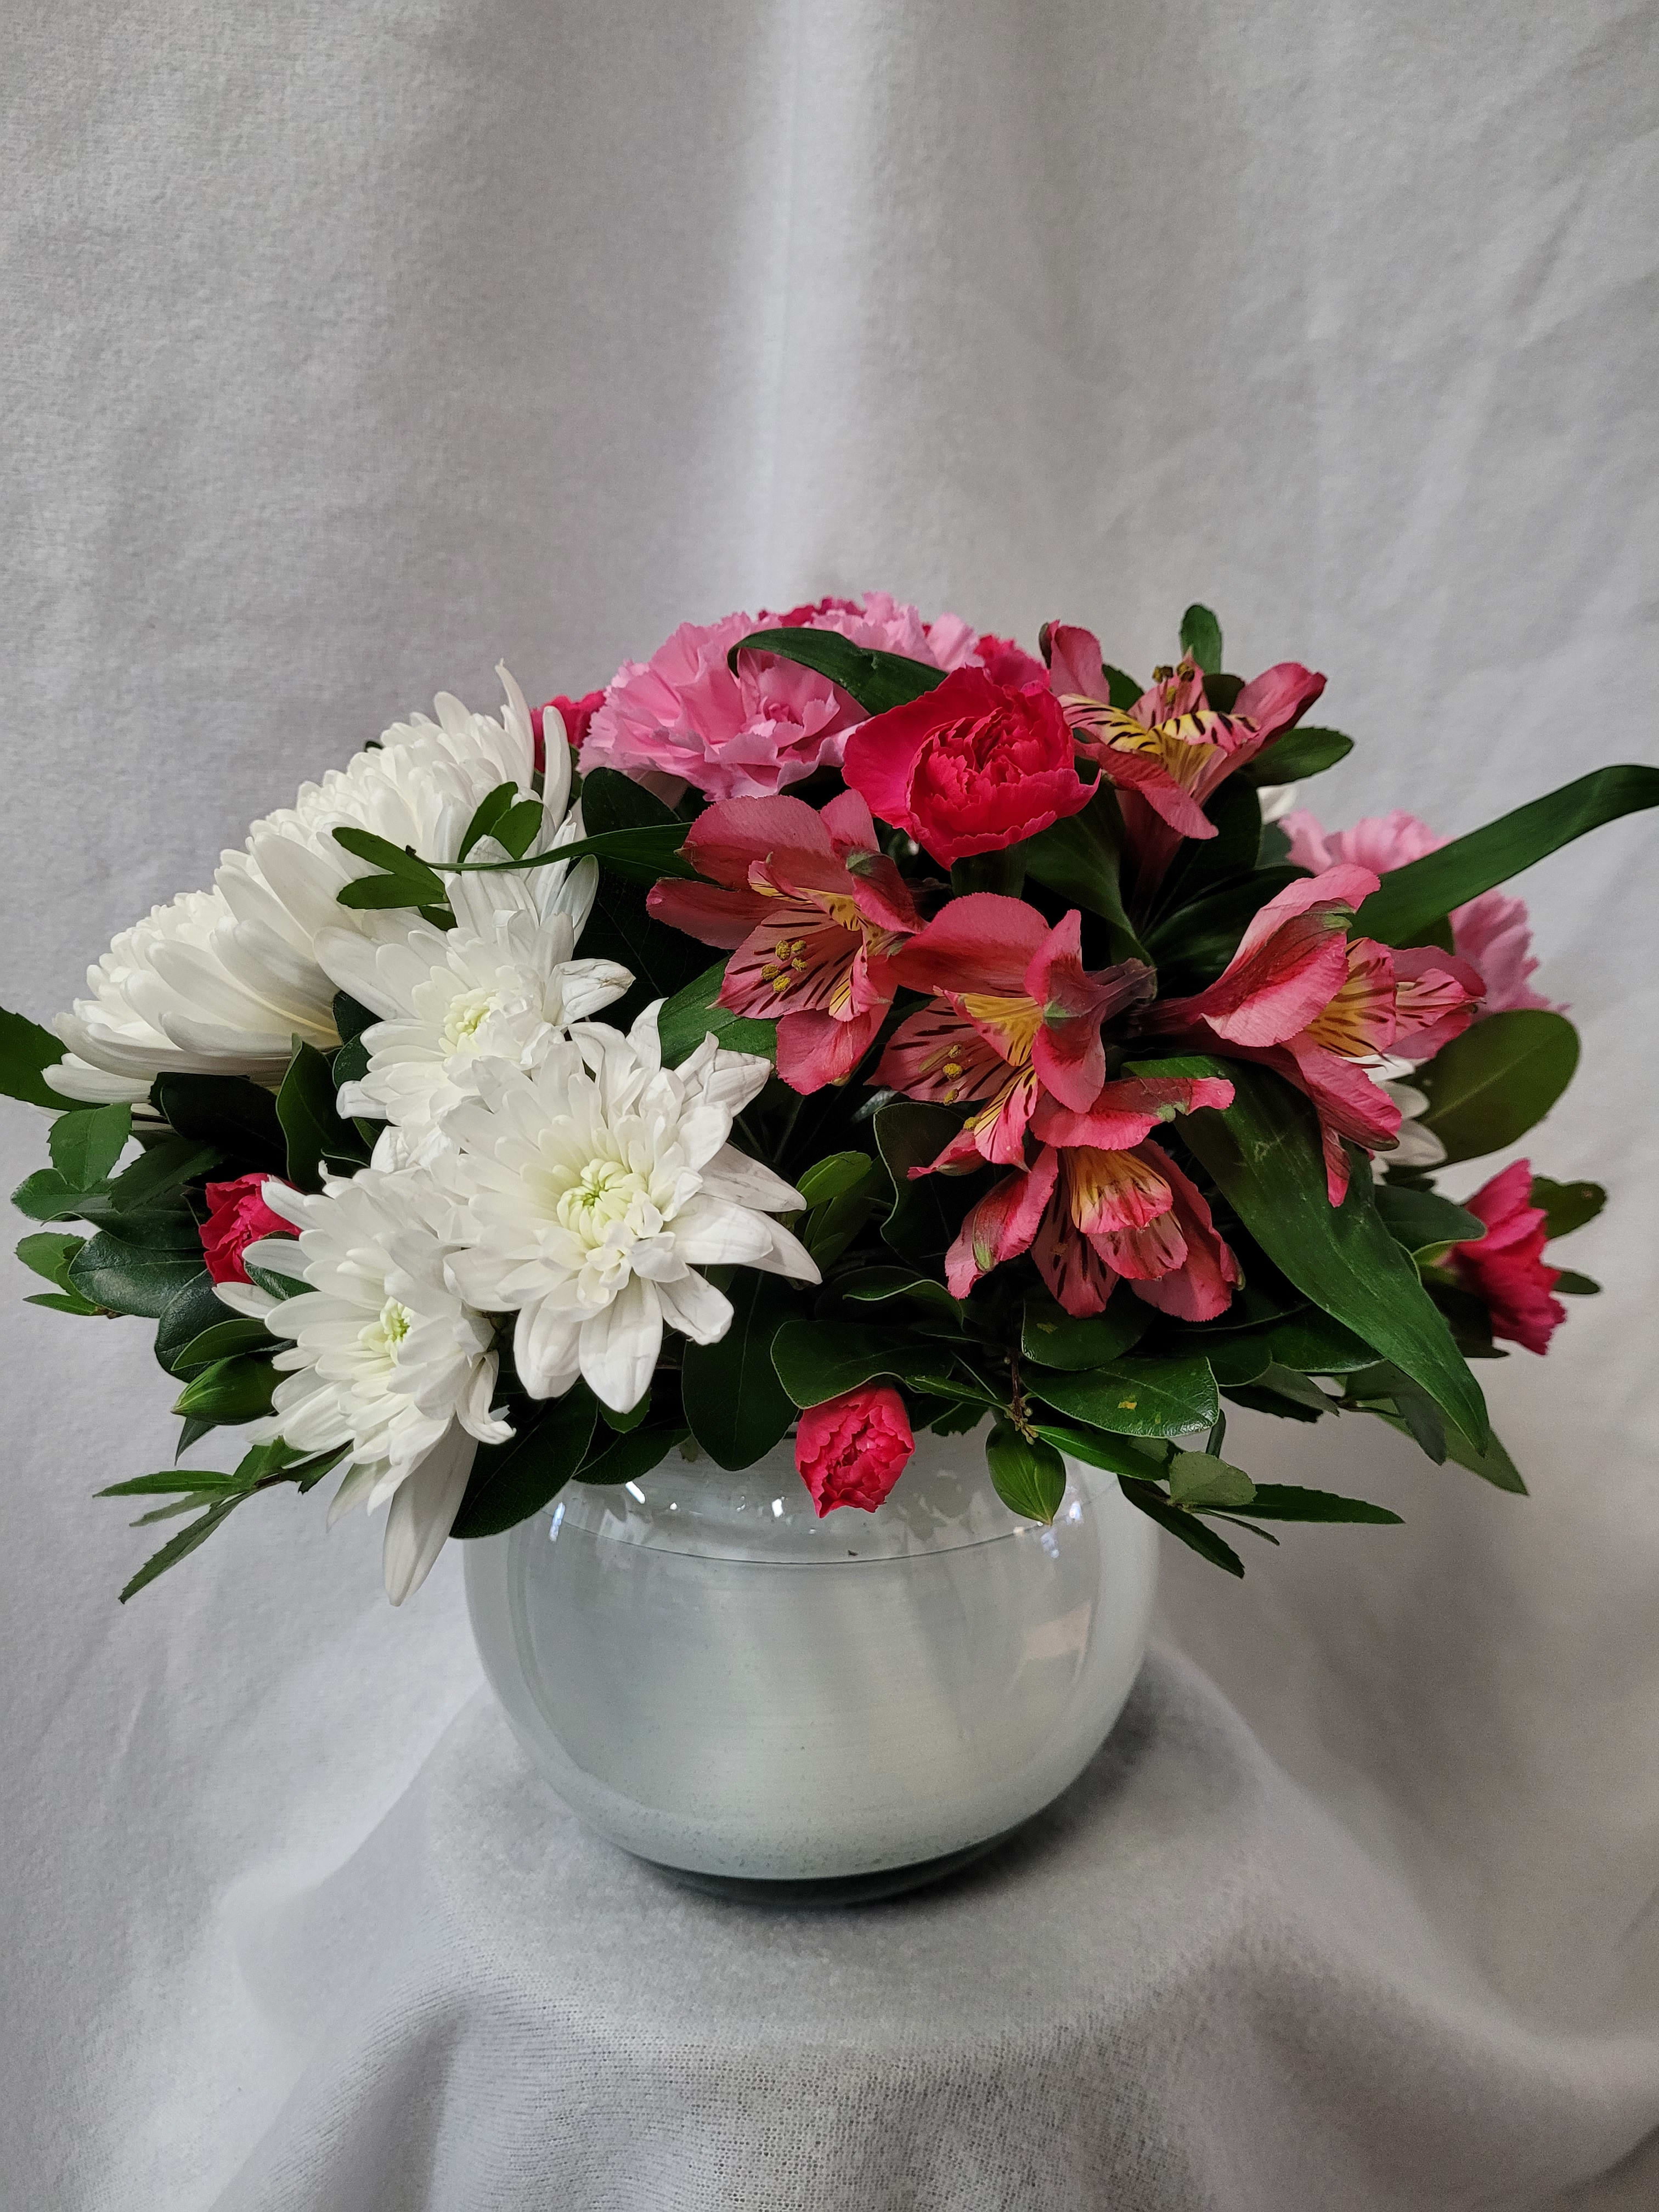 Pink &amp; White Bubble Bowl - This bubble bowl holds white spiders mums, alstromeria, carnations, mini carnations and cushion daisies. The first picture is from the front and the second is from the top.